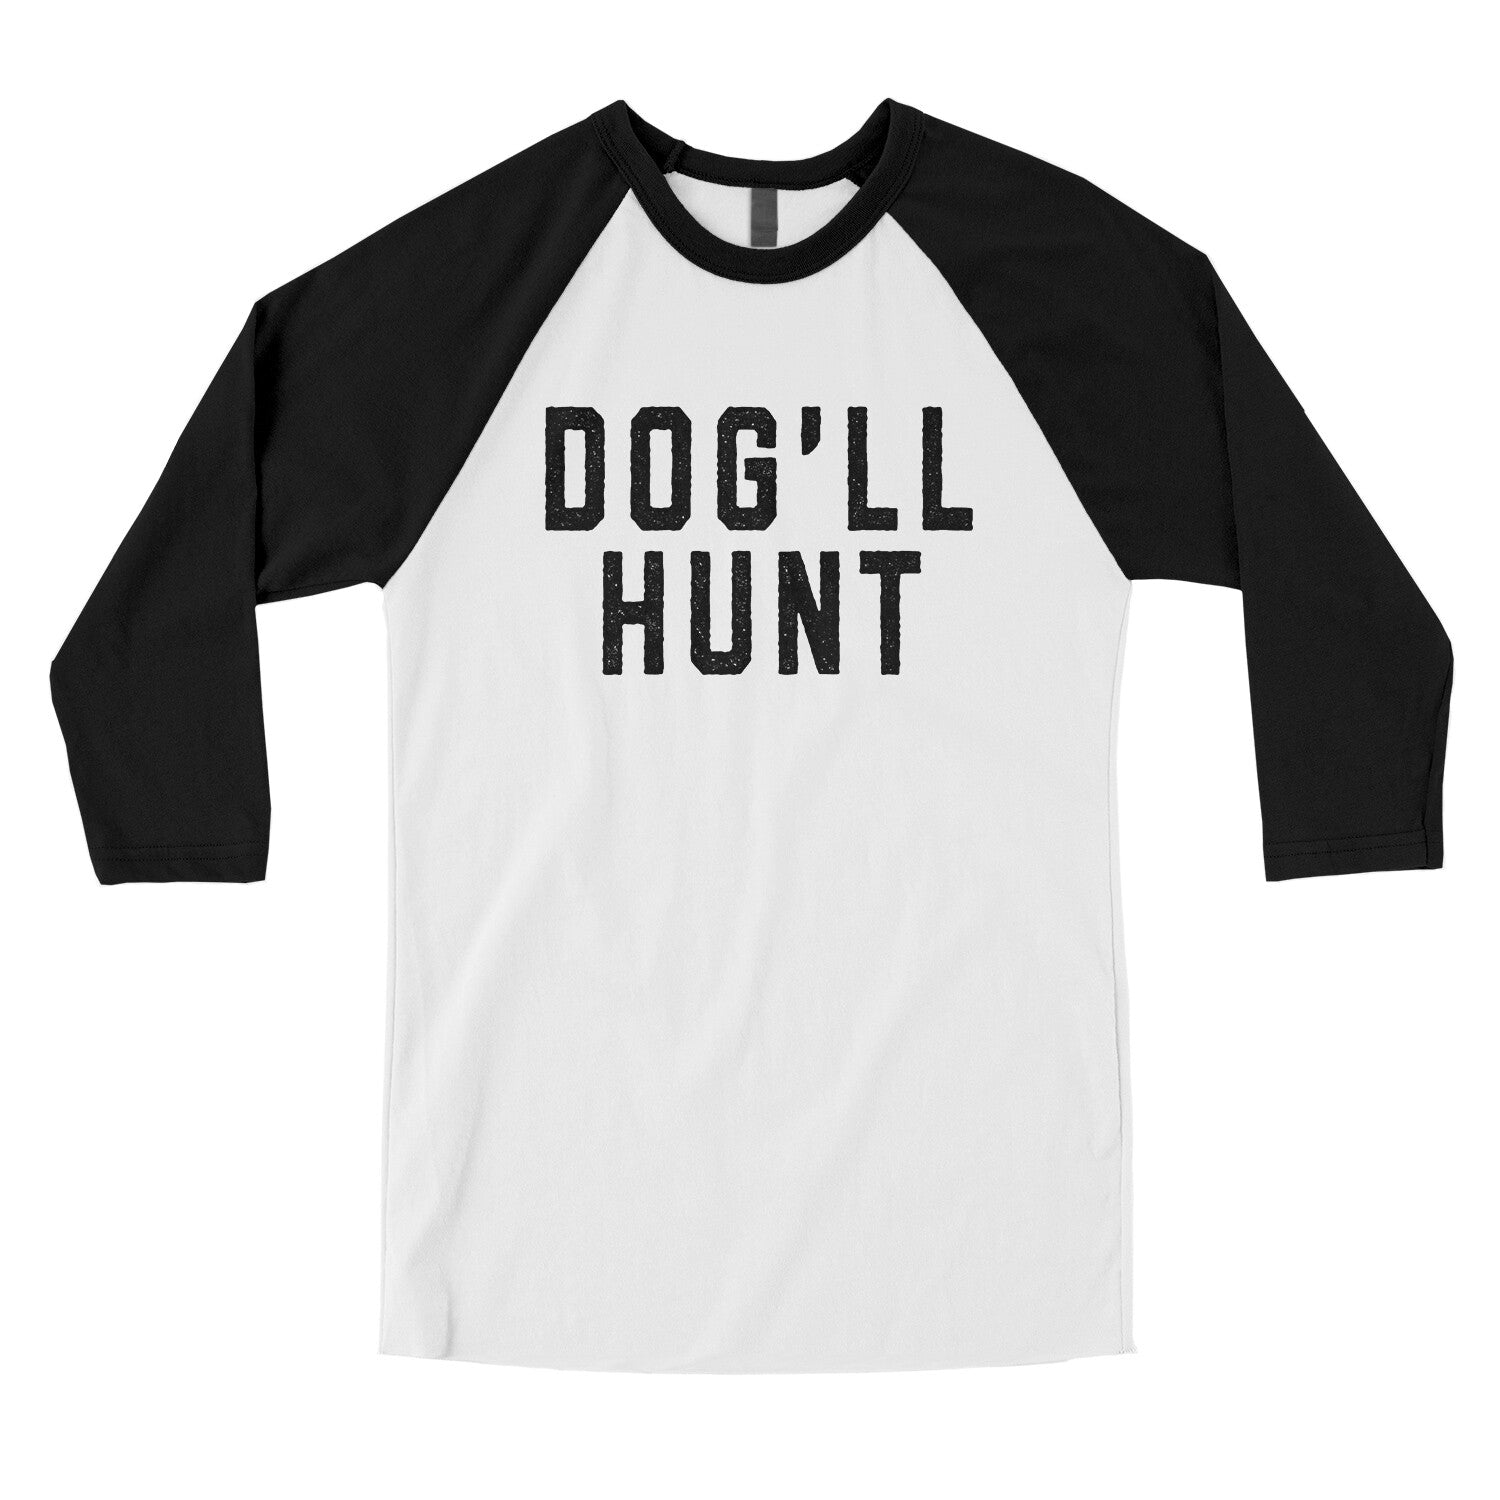 Dog’ll Hunt in White with Black Color